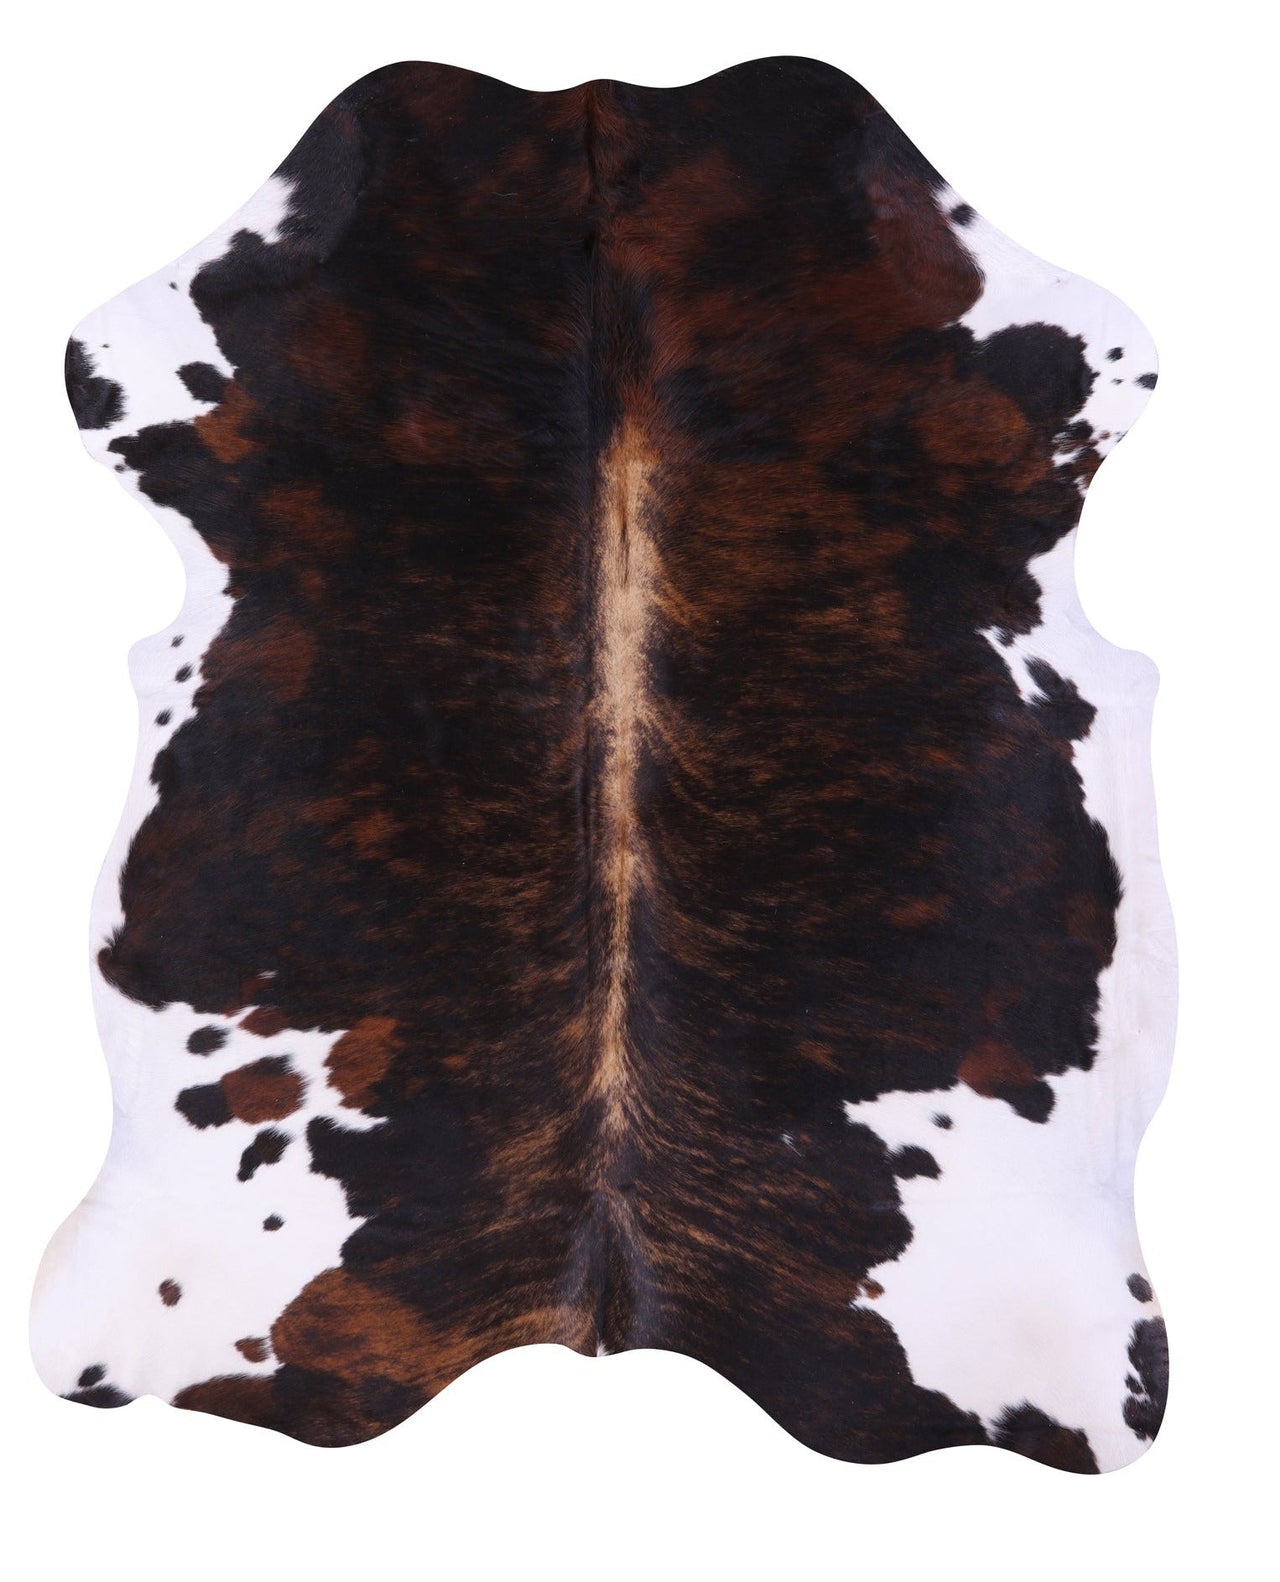 Tricolor Natural Cowhide Rug - Large 7'1"H x 6'0"W